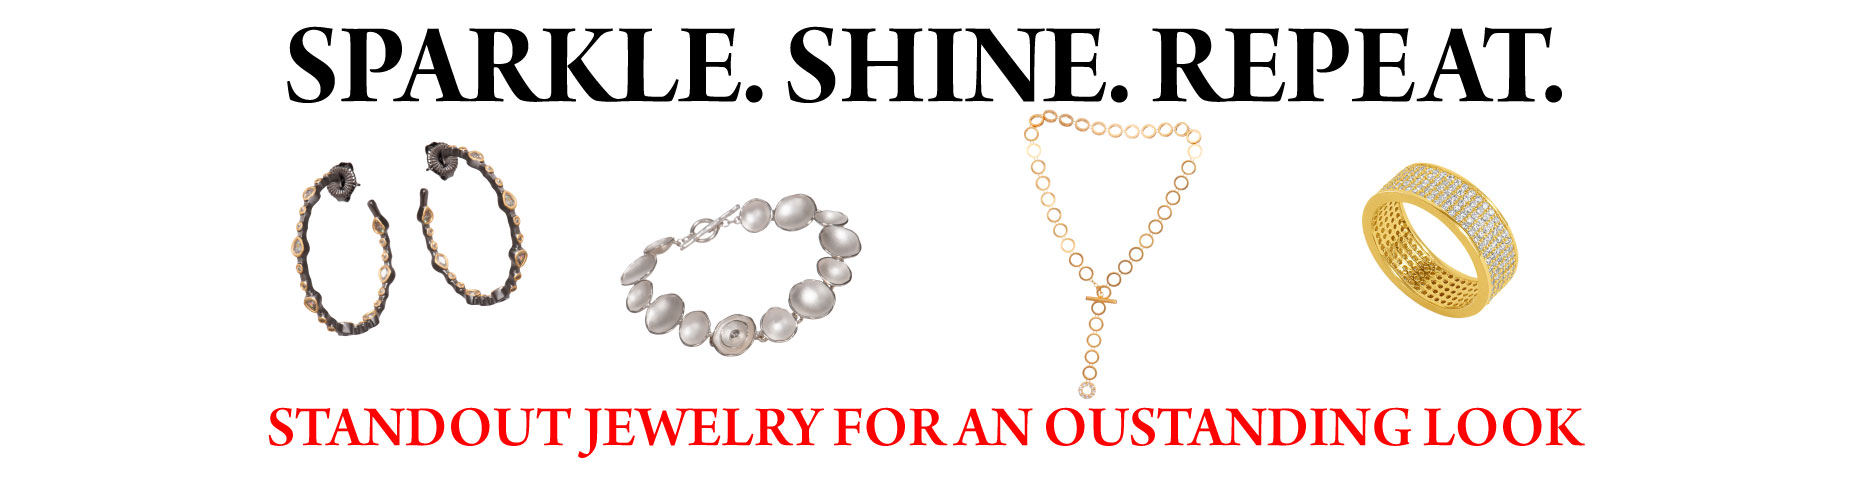 SPARKLE. SHINE. REPEAT.: Standout jewelry for an oustanding look